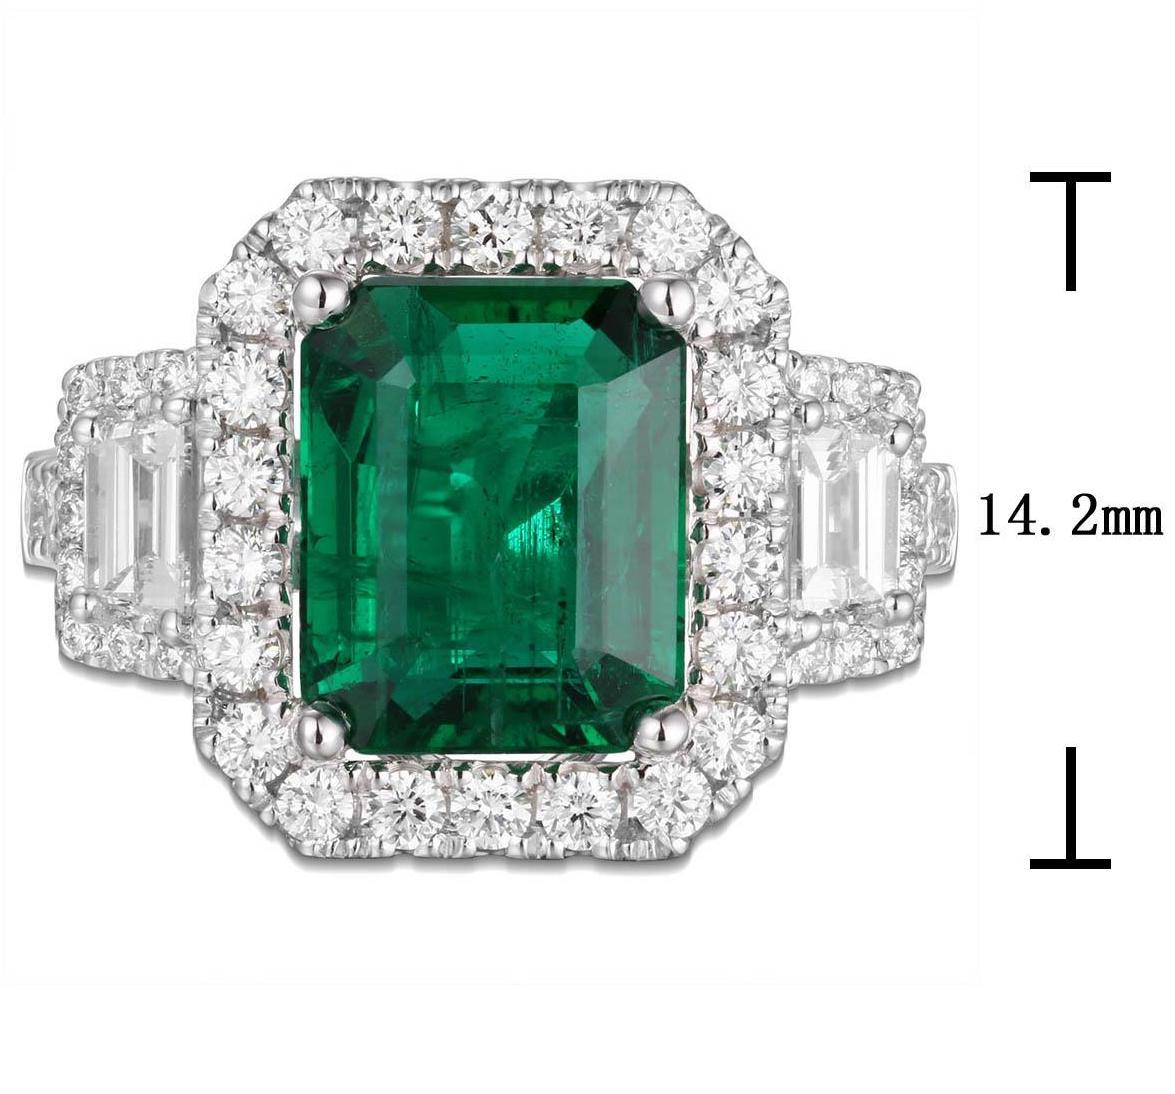 An Emerald statement cocktail ring is a great way to create an elegant, glamorous look.
The center stone is emerald-cut in shape and has gorgeous facets. For extra sparkle, it has been framed by 0.41carat trapezoid side and 48 round brilliant-cut